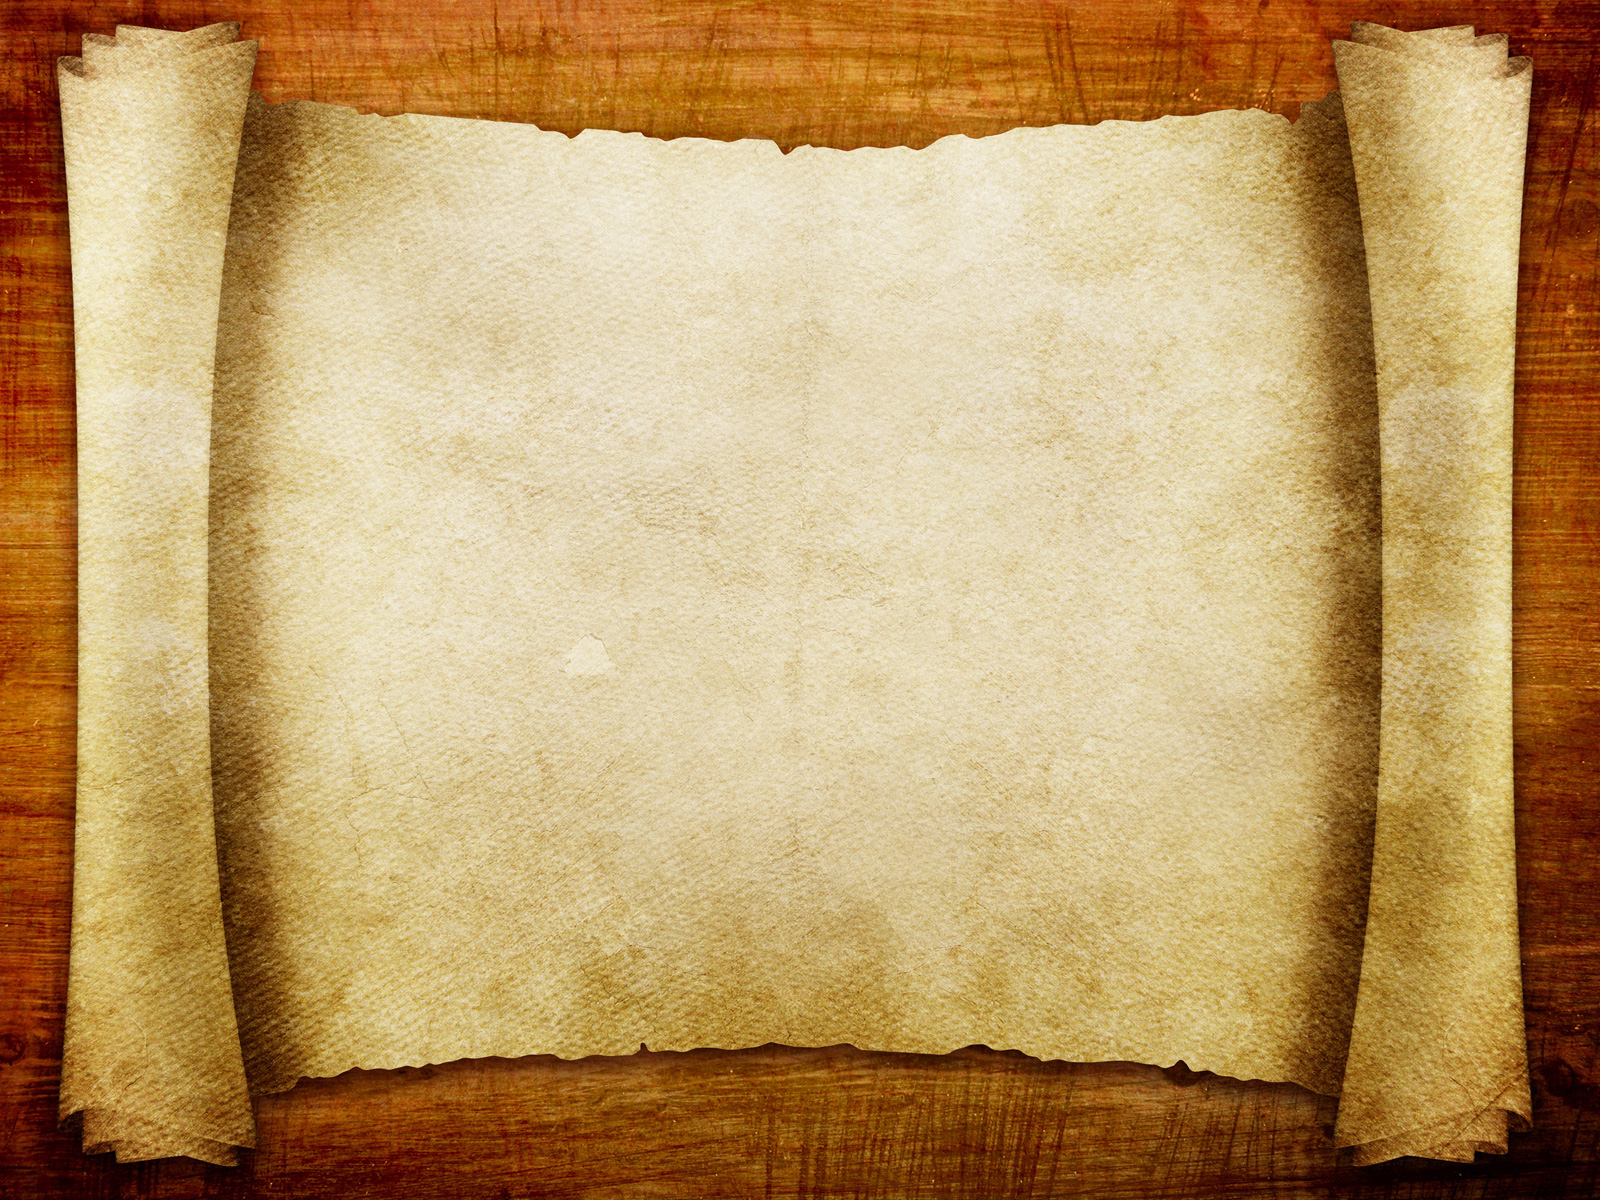 Advanced Blank Scroll Paper powerpoint background